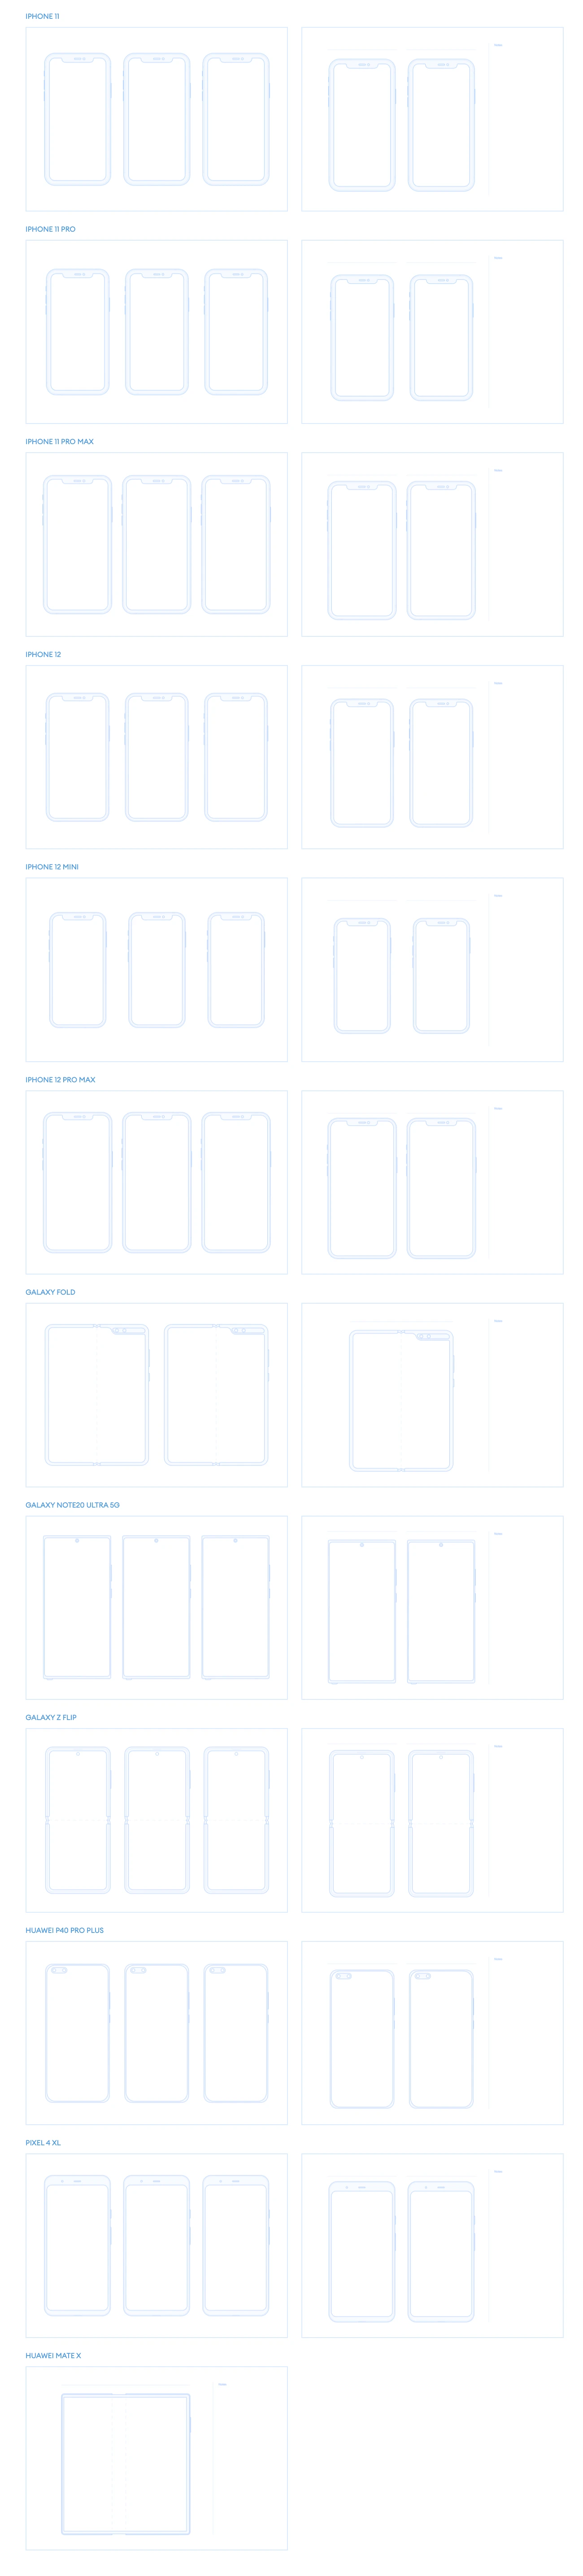 Printables Free Template for Figma - Free printable templates for your mobile sketching. Start creating your app with a clean mind and representation of a screen structure. There are 12 devices in the pack, for both iPhone and Android, so you can display on multiple devices.